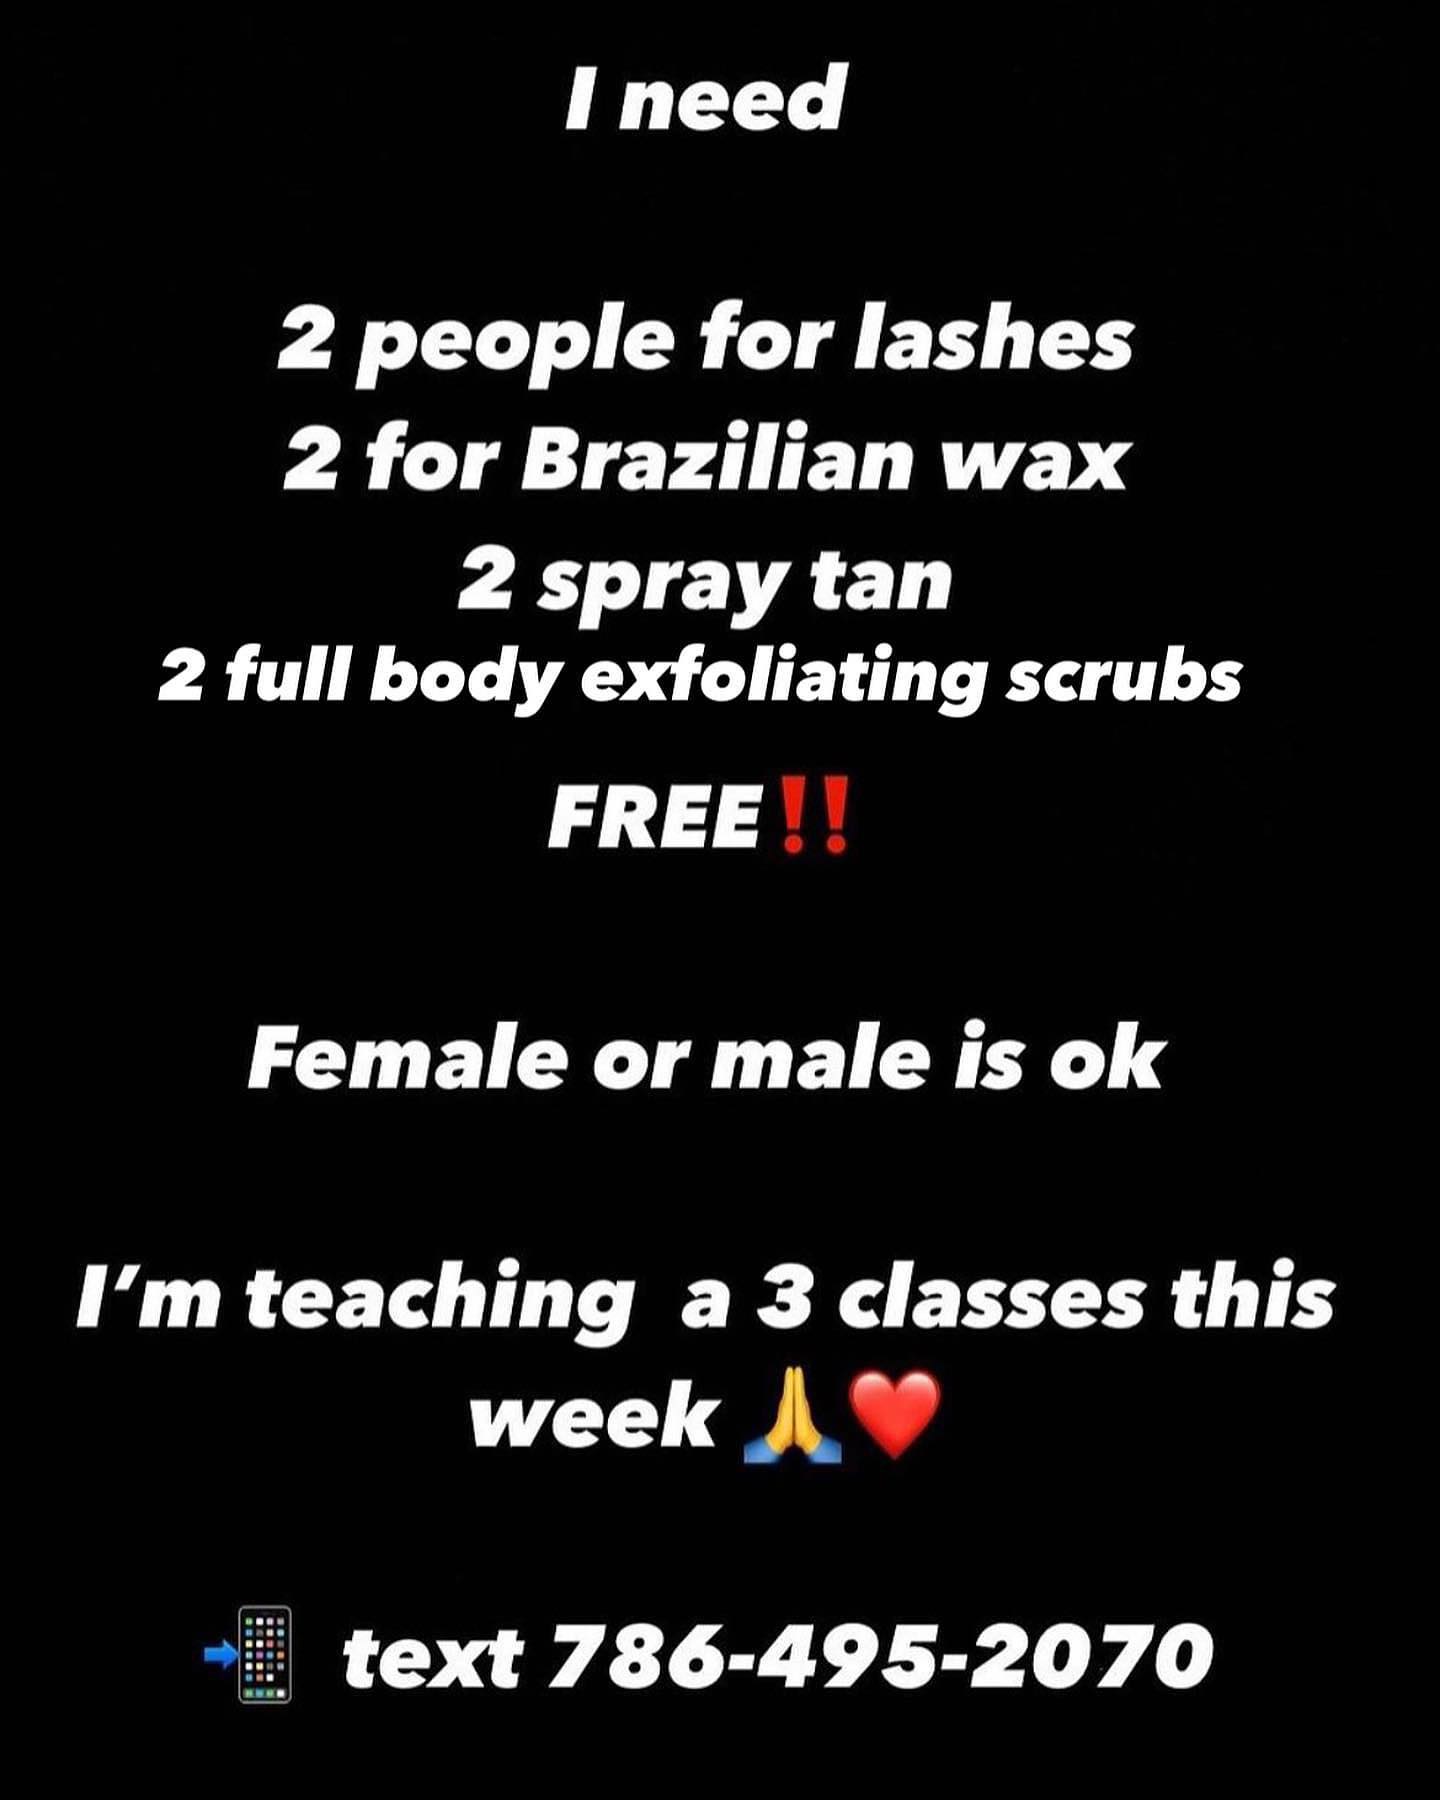 SHARE PLEASE. IM TEACHING CLASSES ALL THESE WEEKS ❤️💋🙏